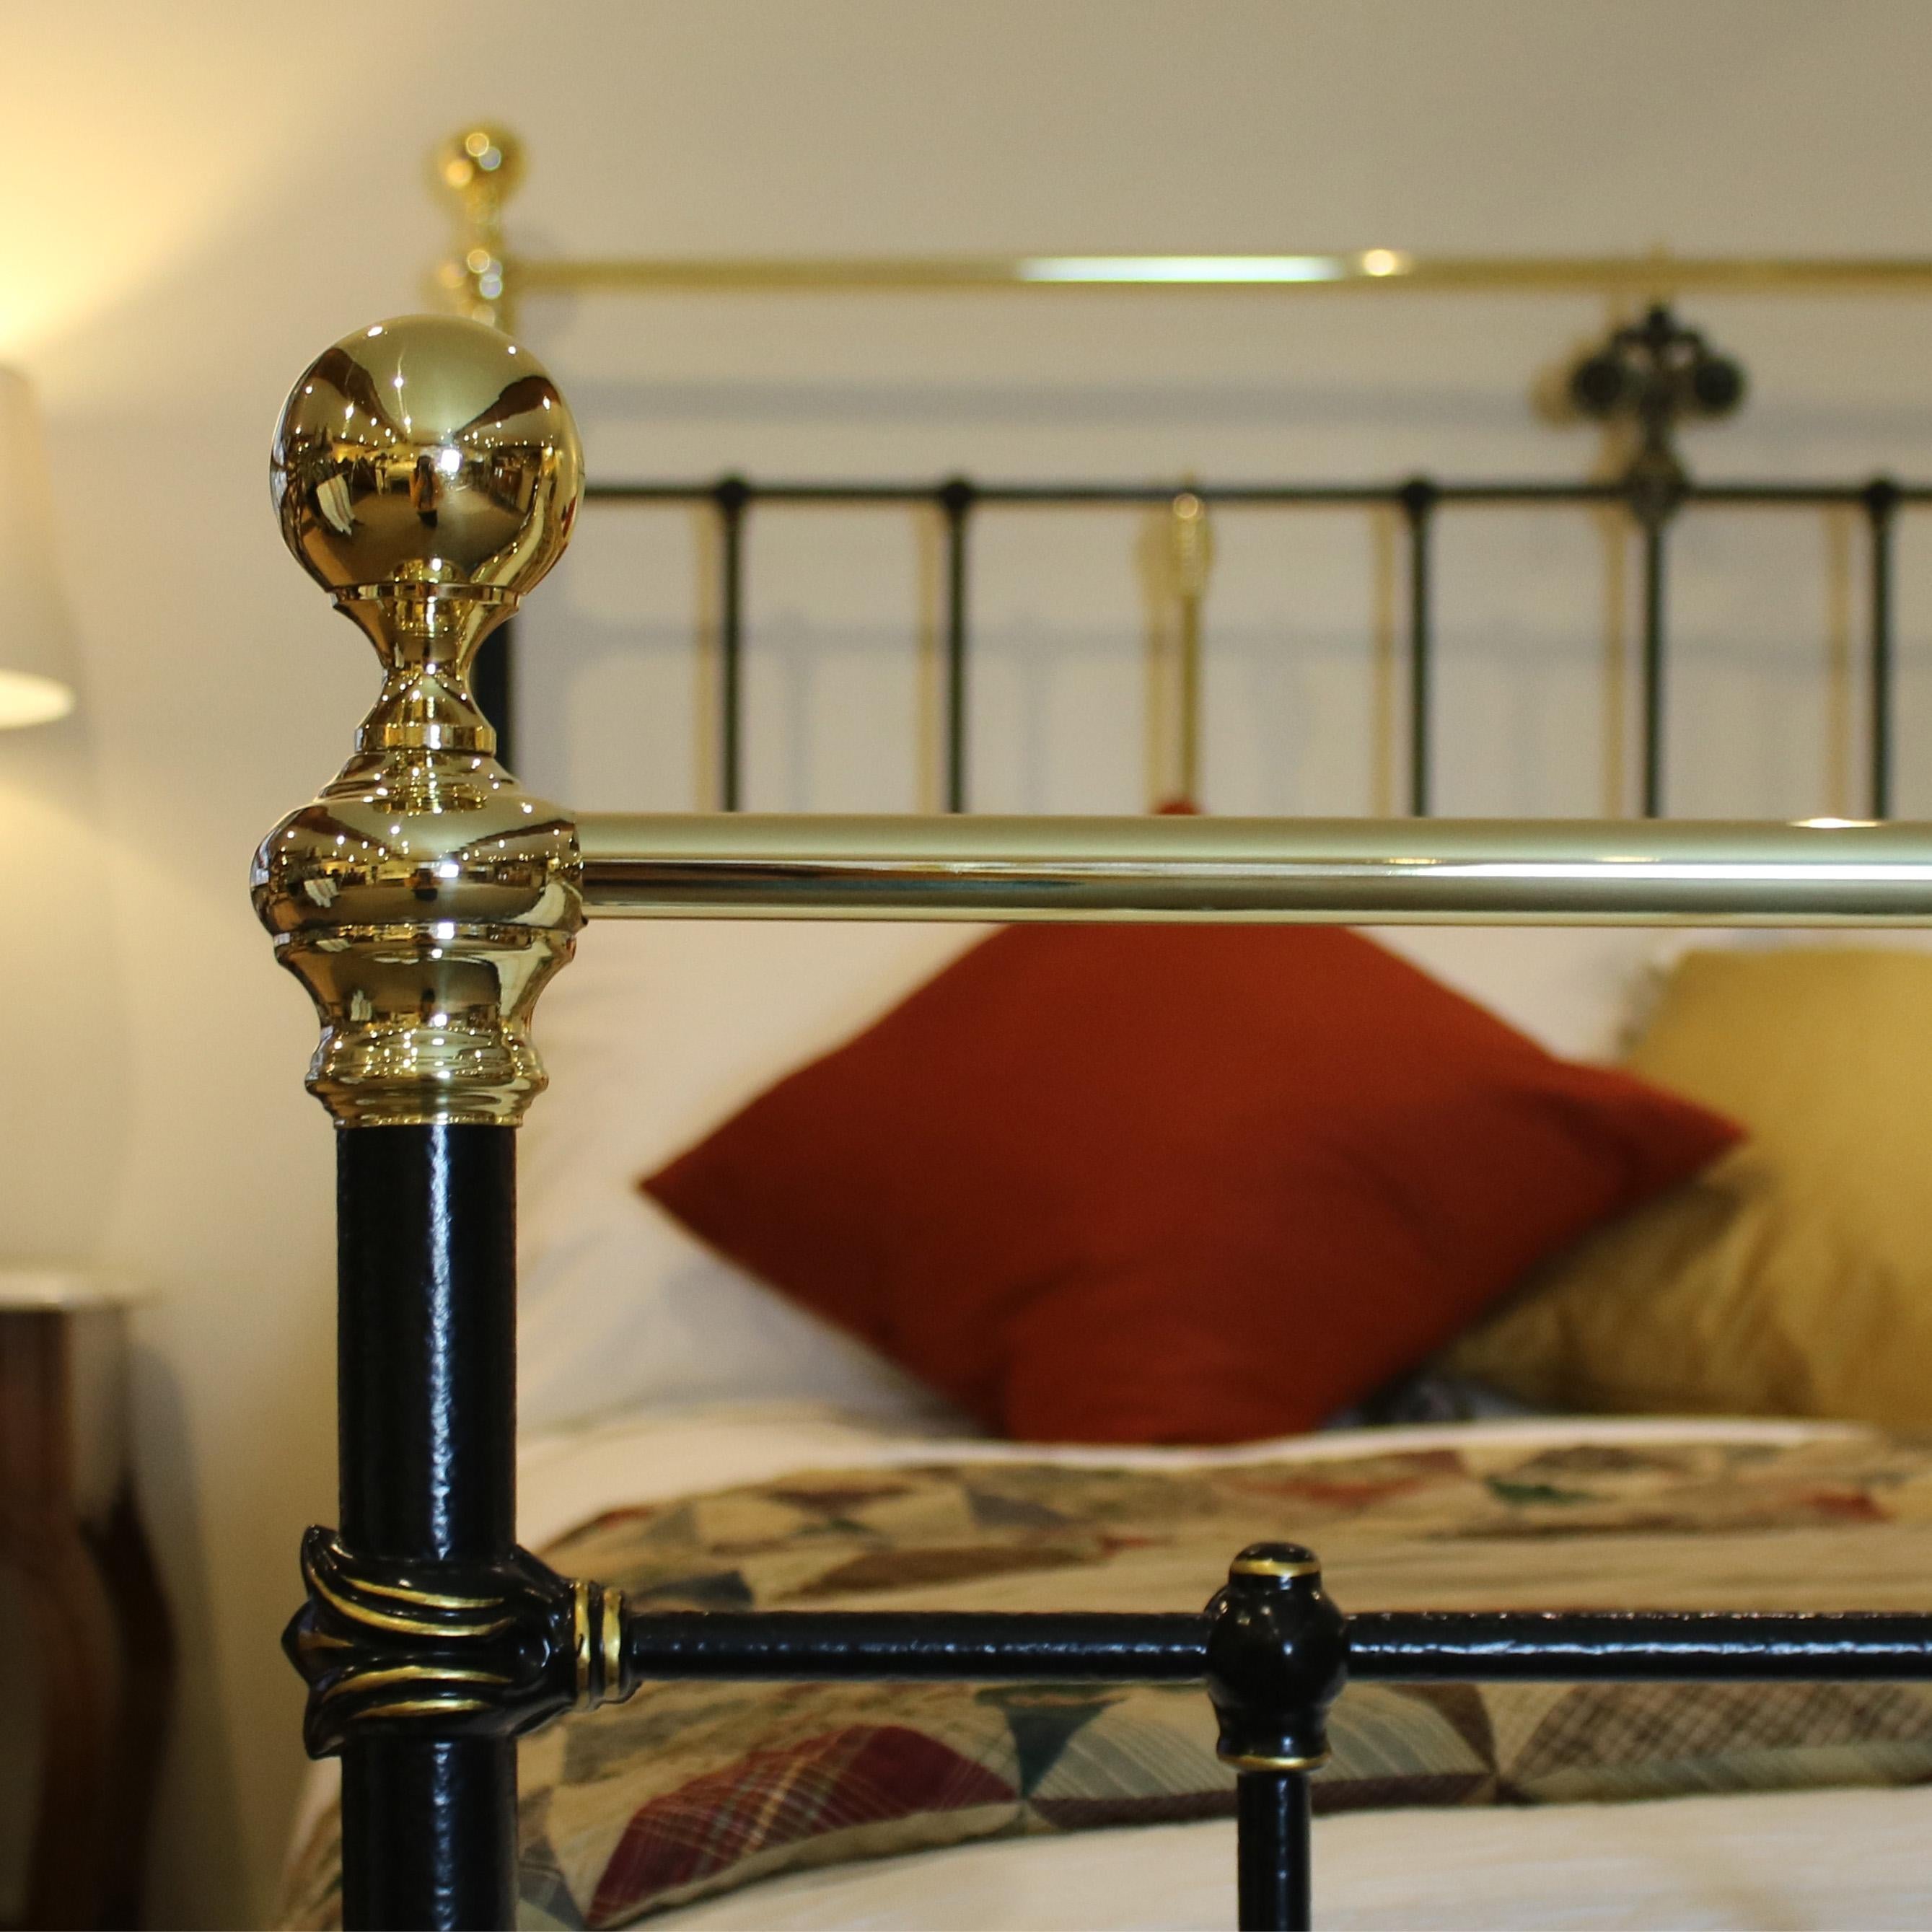 Victorian cast iron and brass bed in black with hand gold line work detailing the castings. This bed has a straight top rail. 

The price is for the bed frame alone. The base, mattress, bedding and linen are extra and can be supplied.